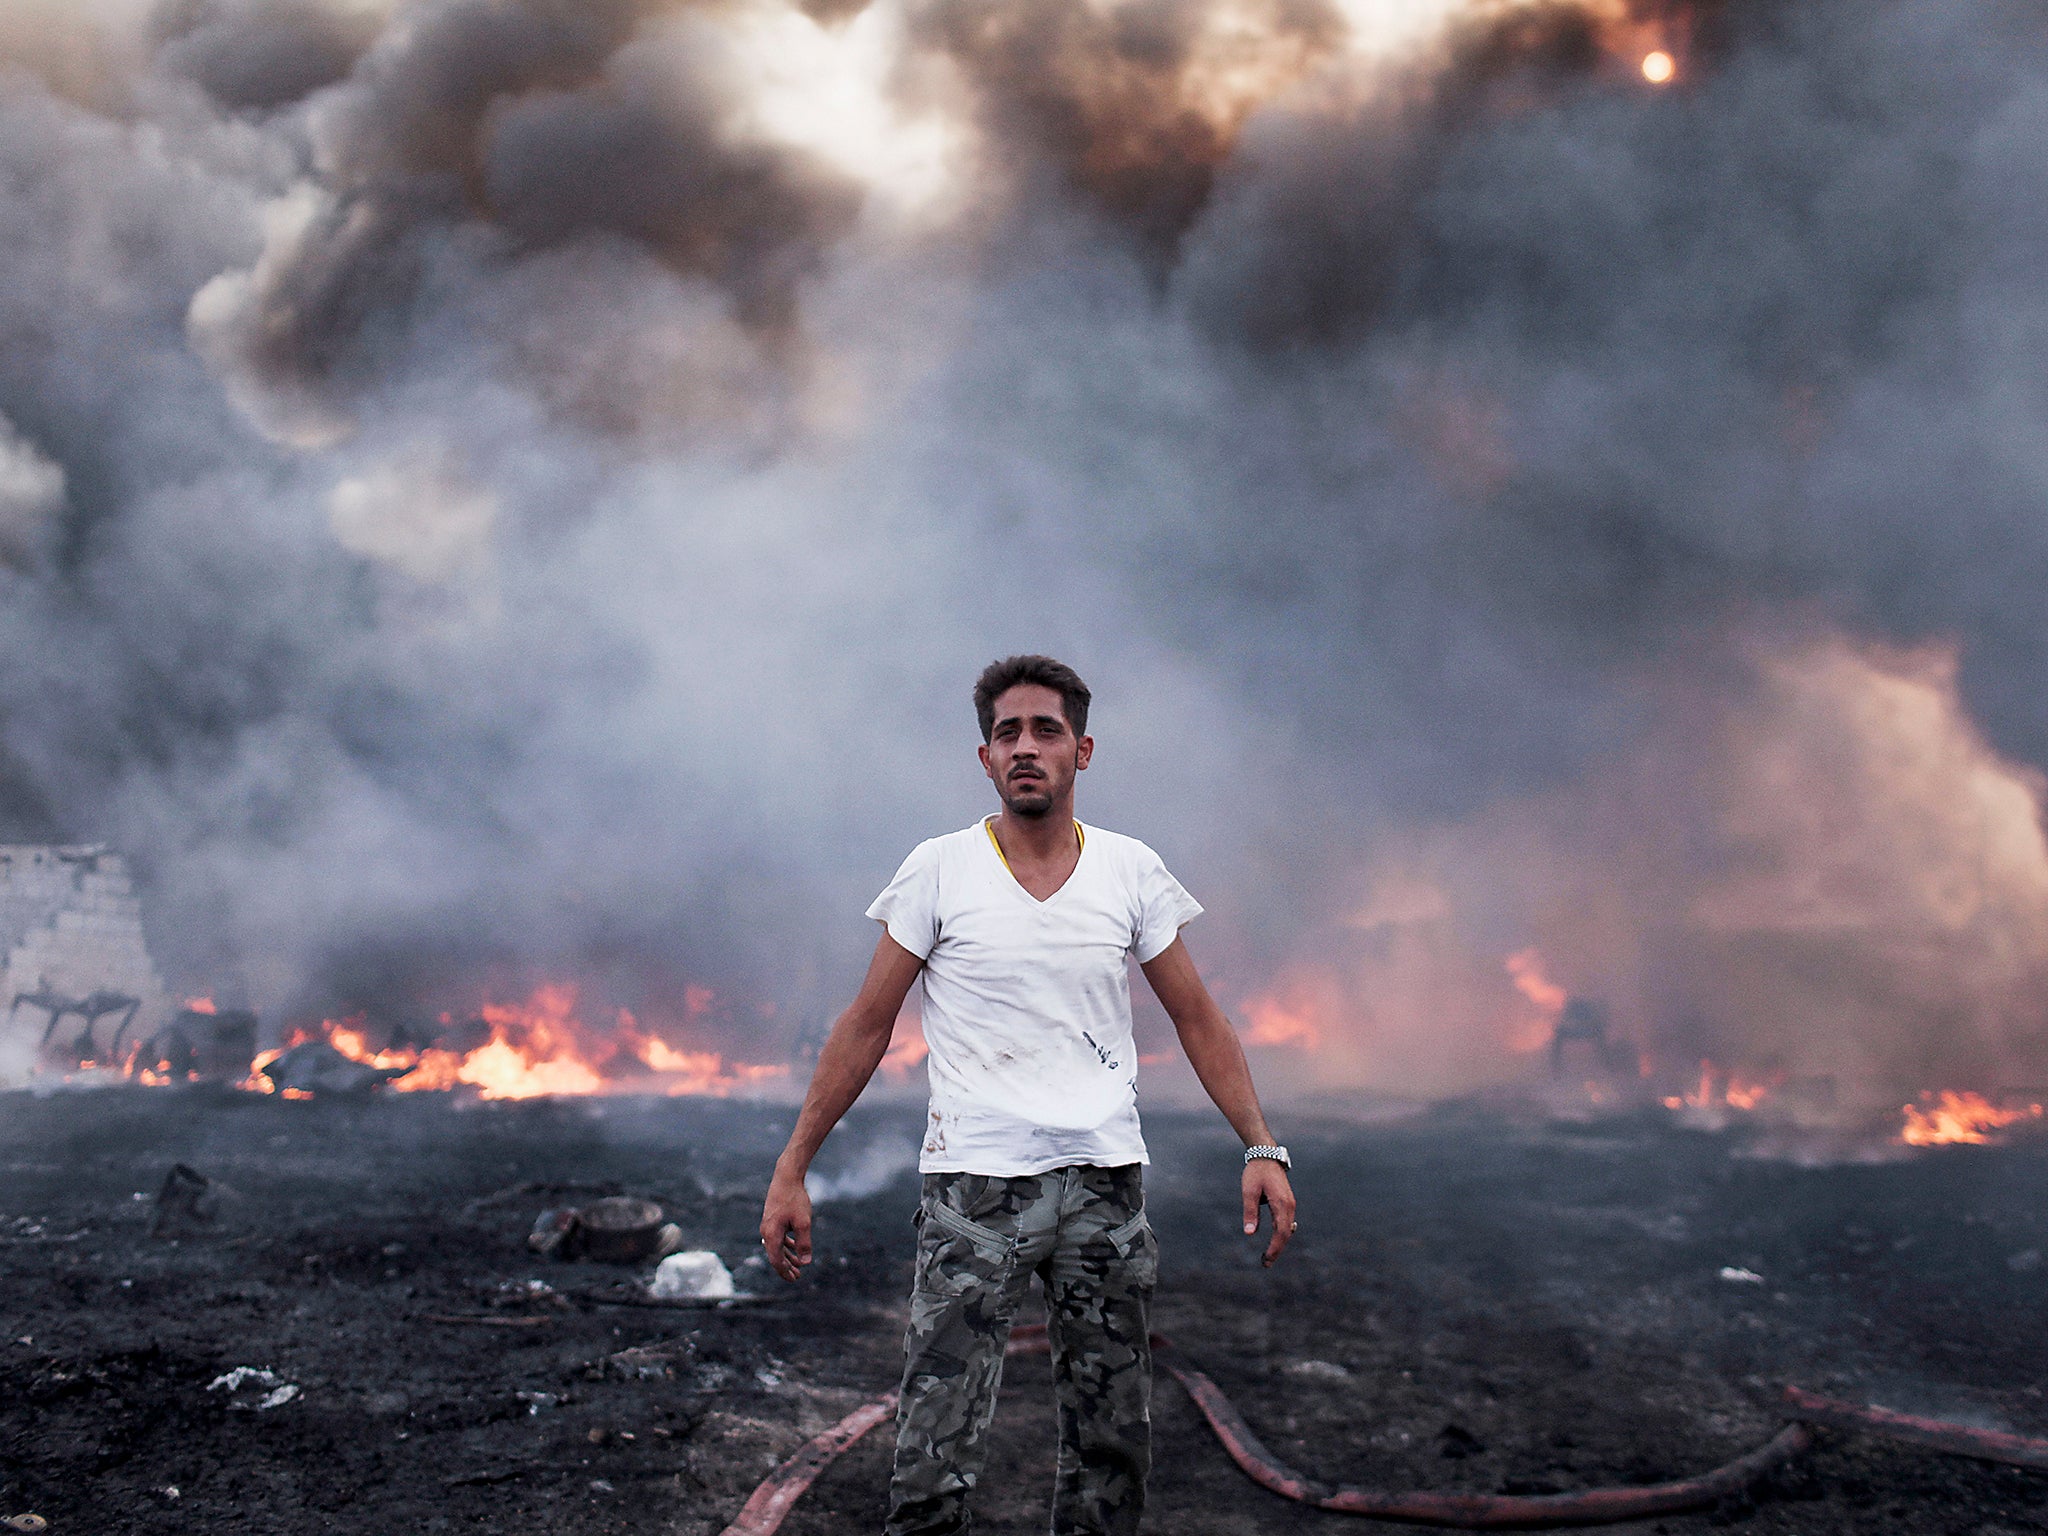 A destroyed plastic factory burns in the Khatba district of Tripoli in September 2011, where Qaddafi loyalists and rebels battled for Libya’s capital city